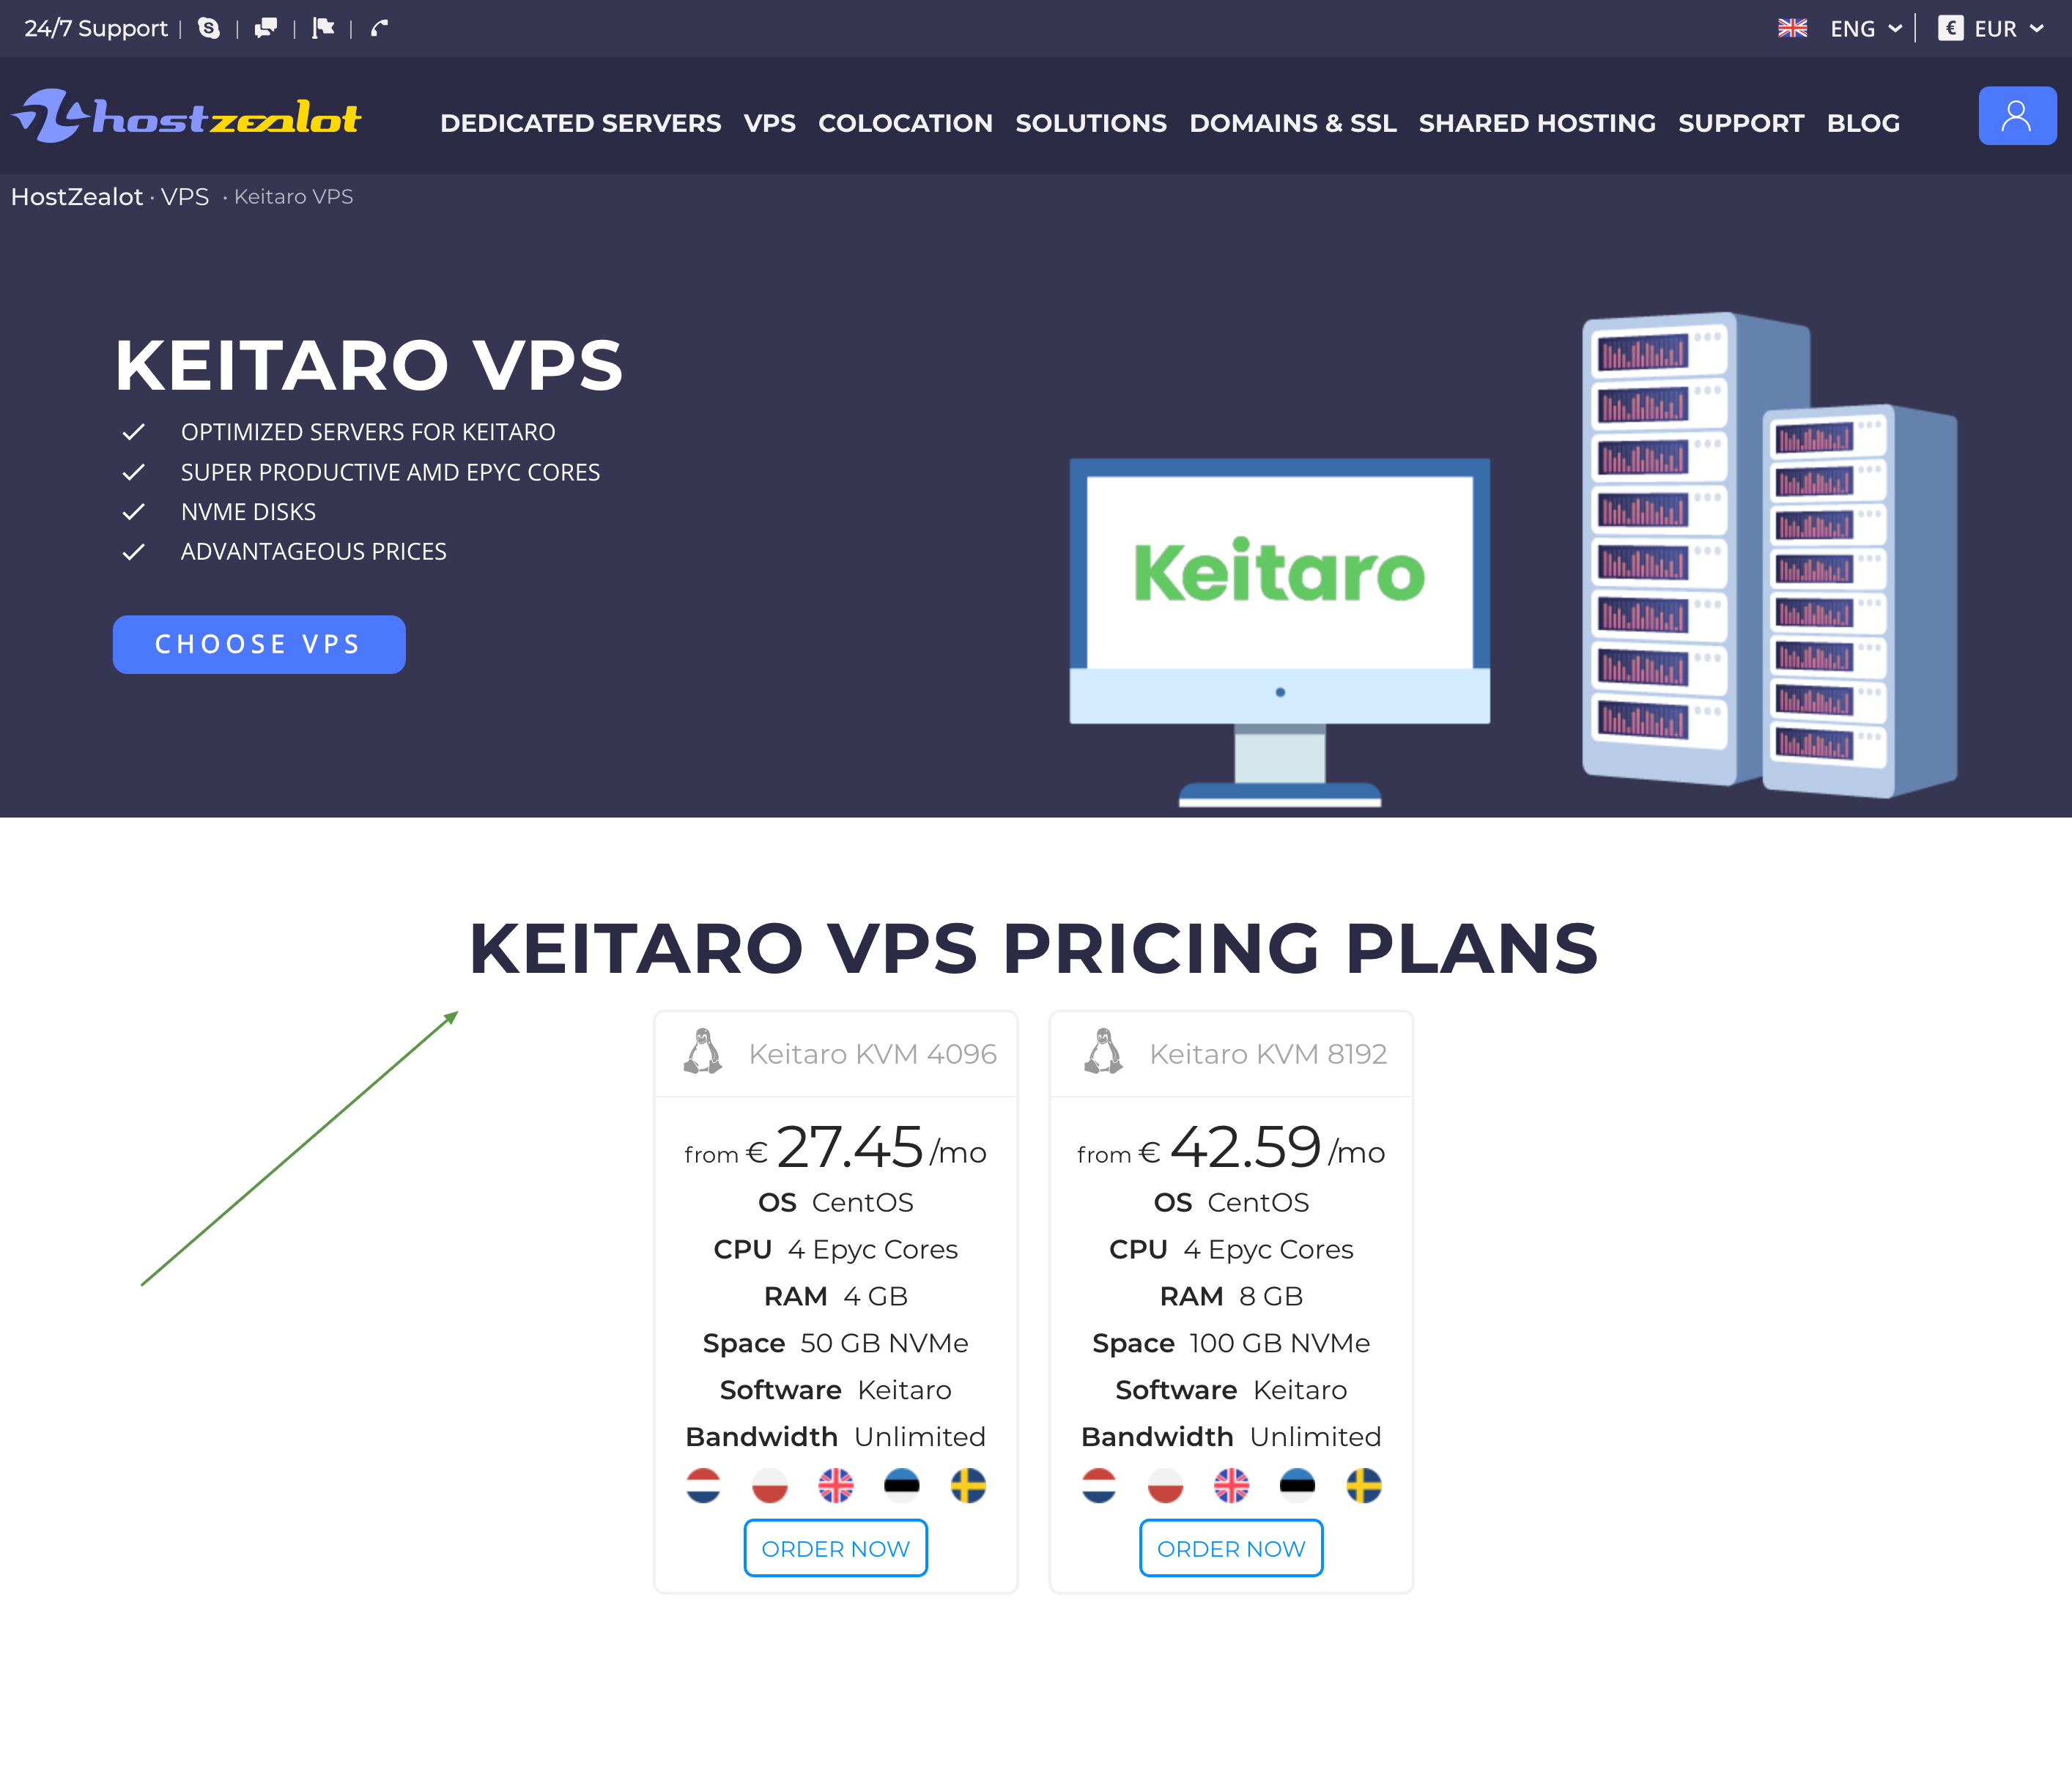 VPS Pricing Plans